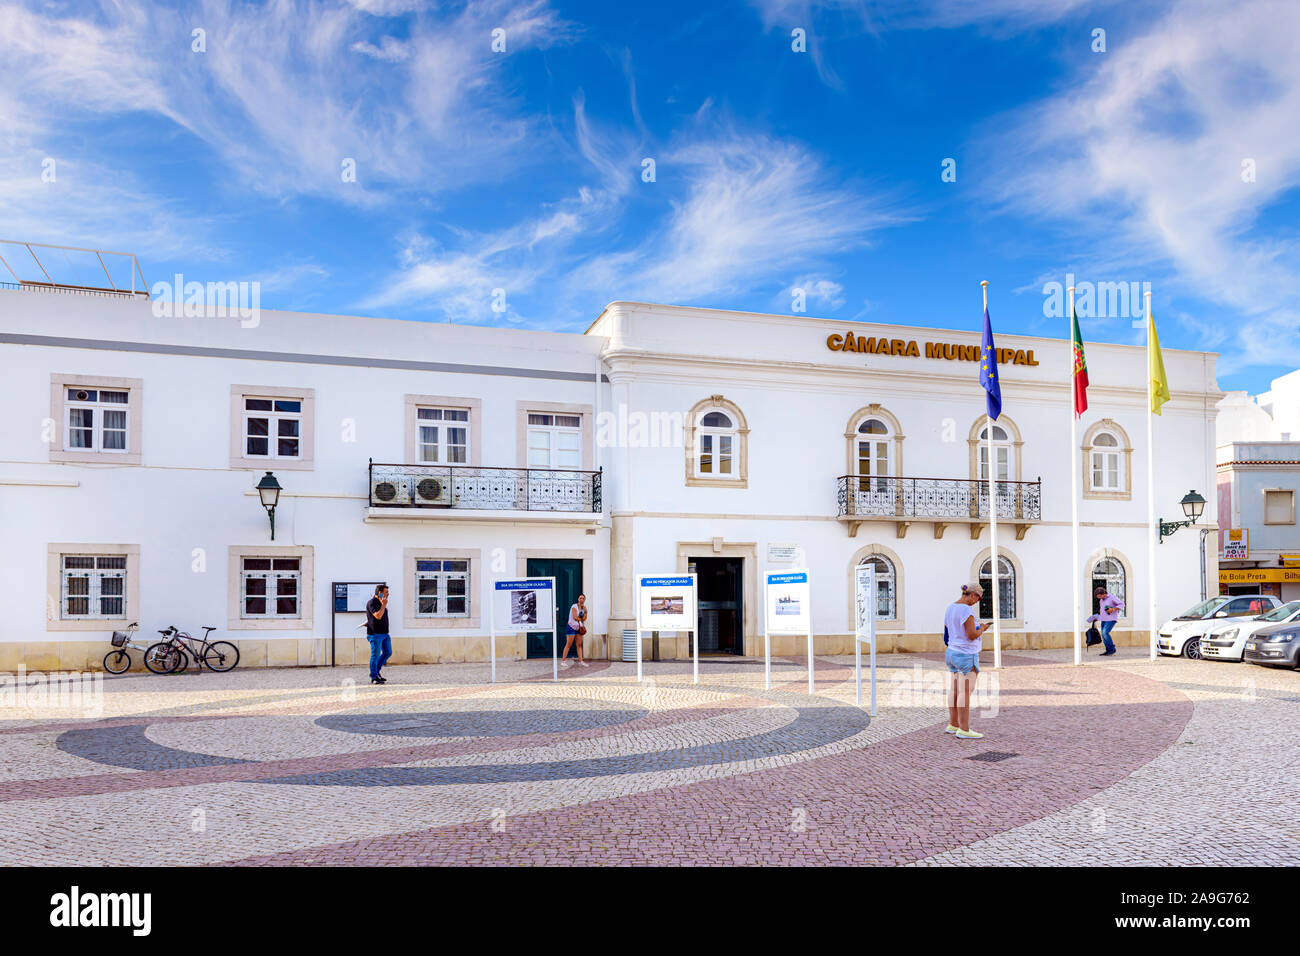 The Olhao town hall camera municipal council office building Olhao, East Algarve, Portugal. Stock Photo